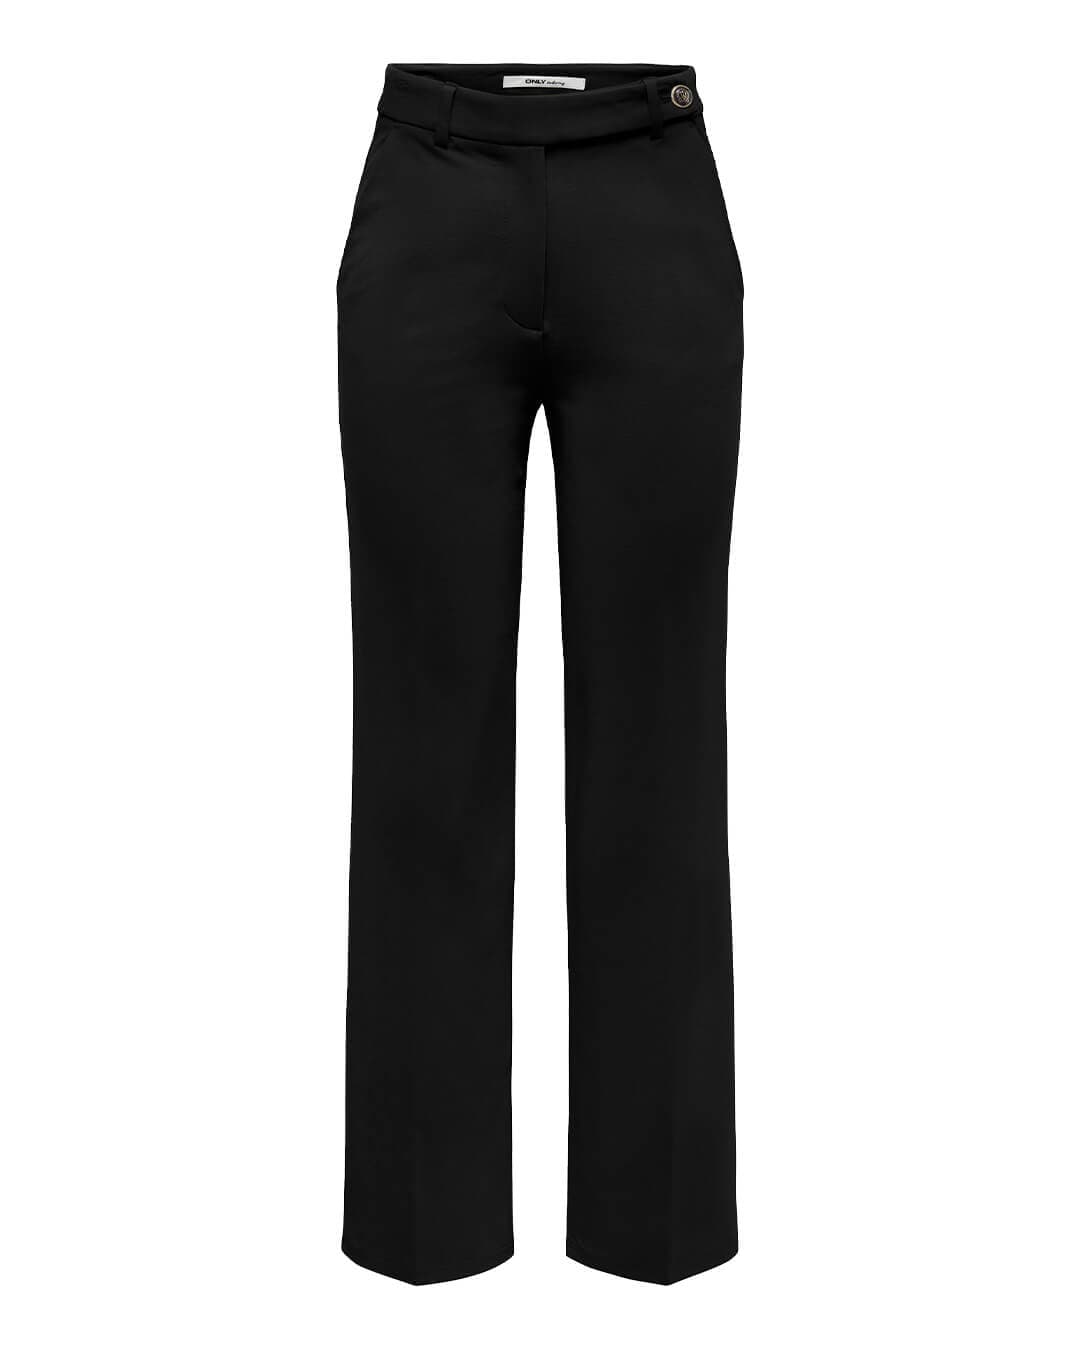 Only Trousers Only Eti Life Black Trousers